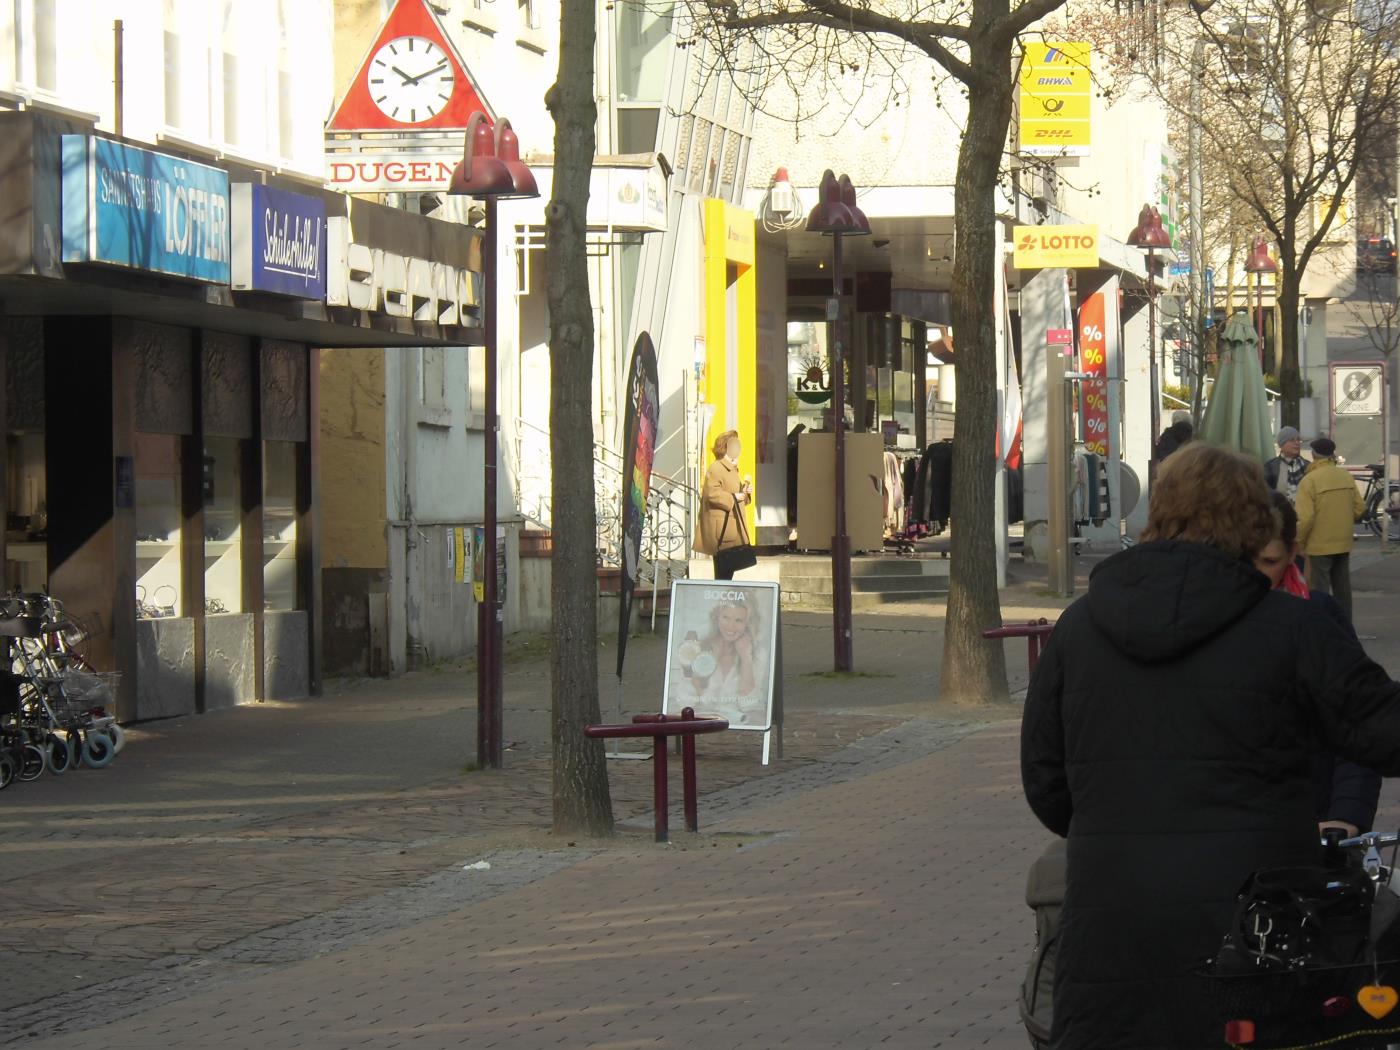 Jehovah's Witnesses in Wiesloch